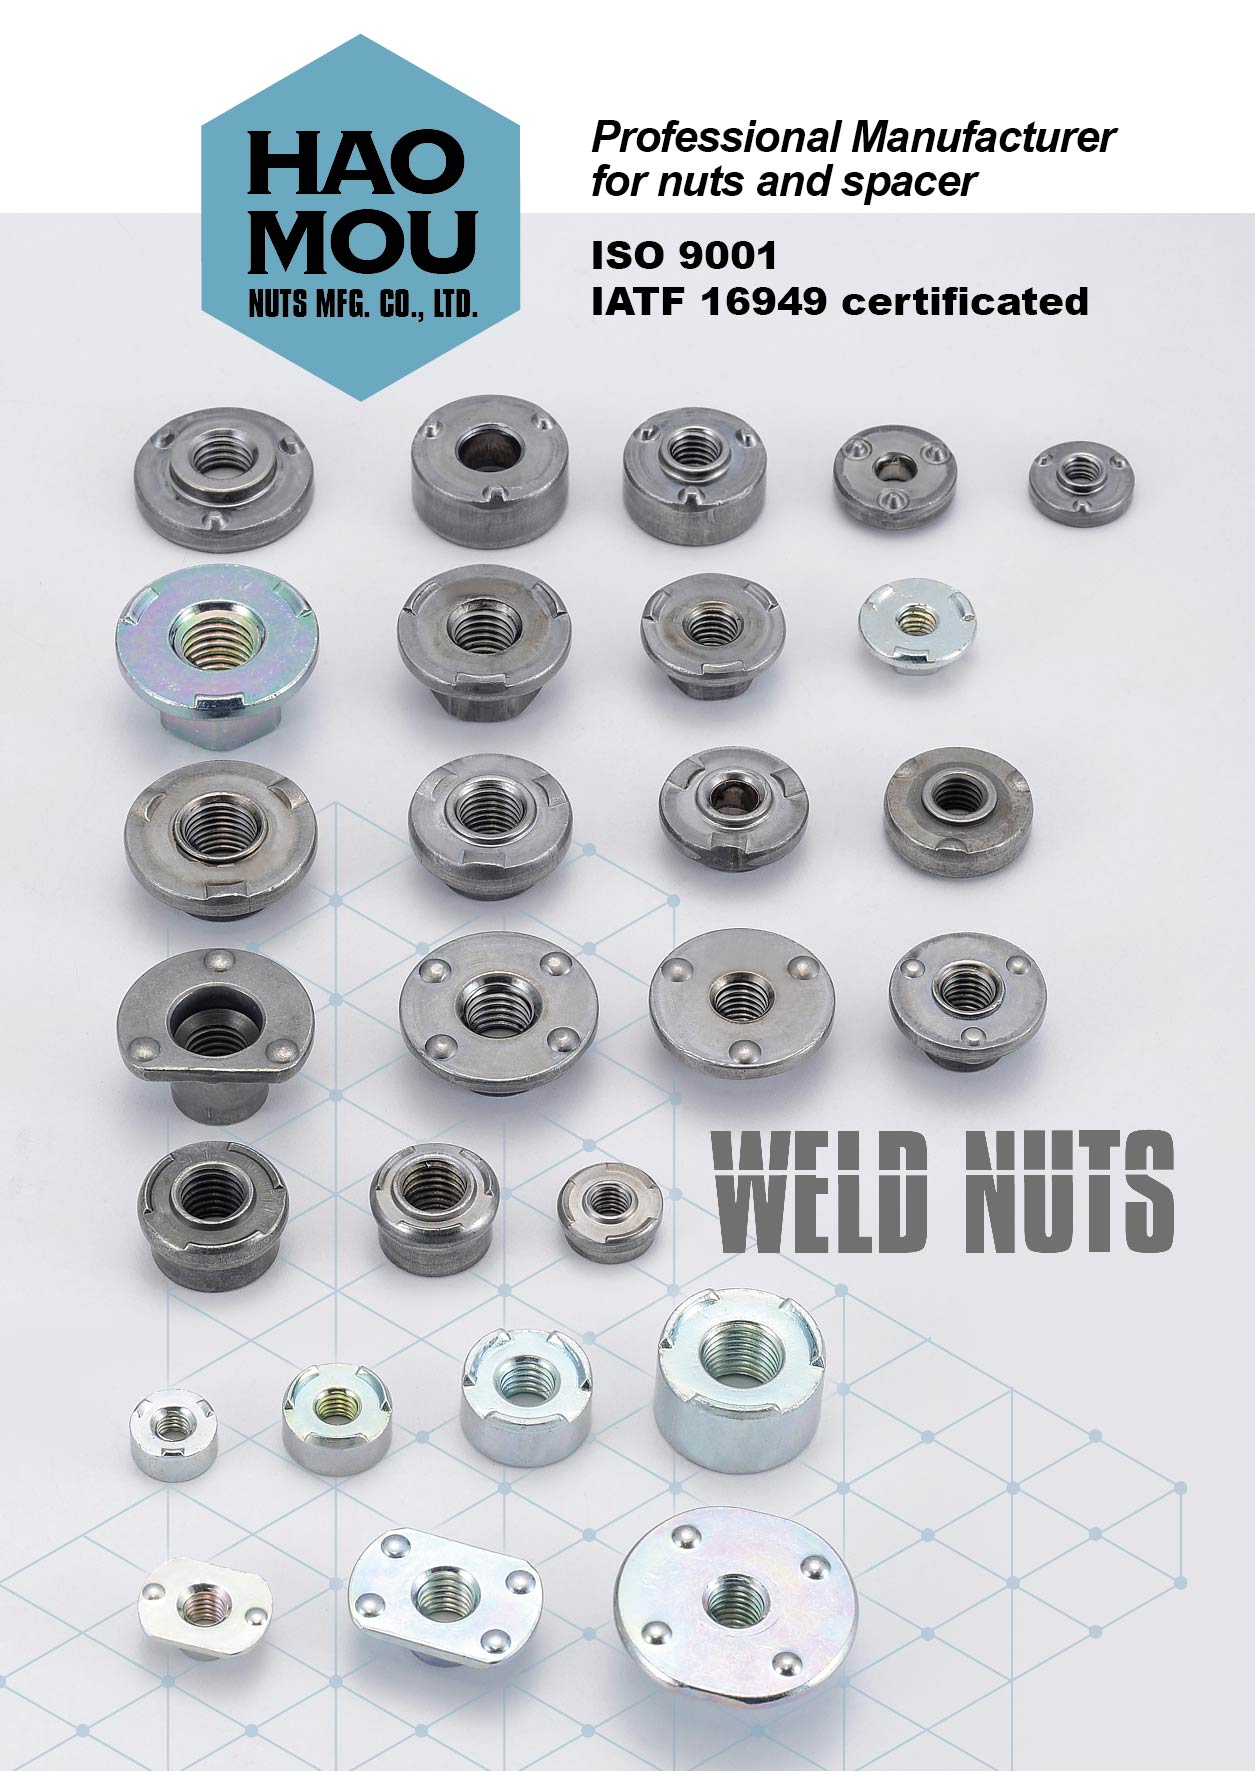 HAO MOU NUTS MFG. CO., LTD. Online Catalogues